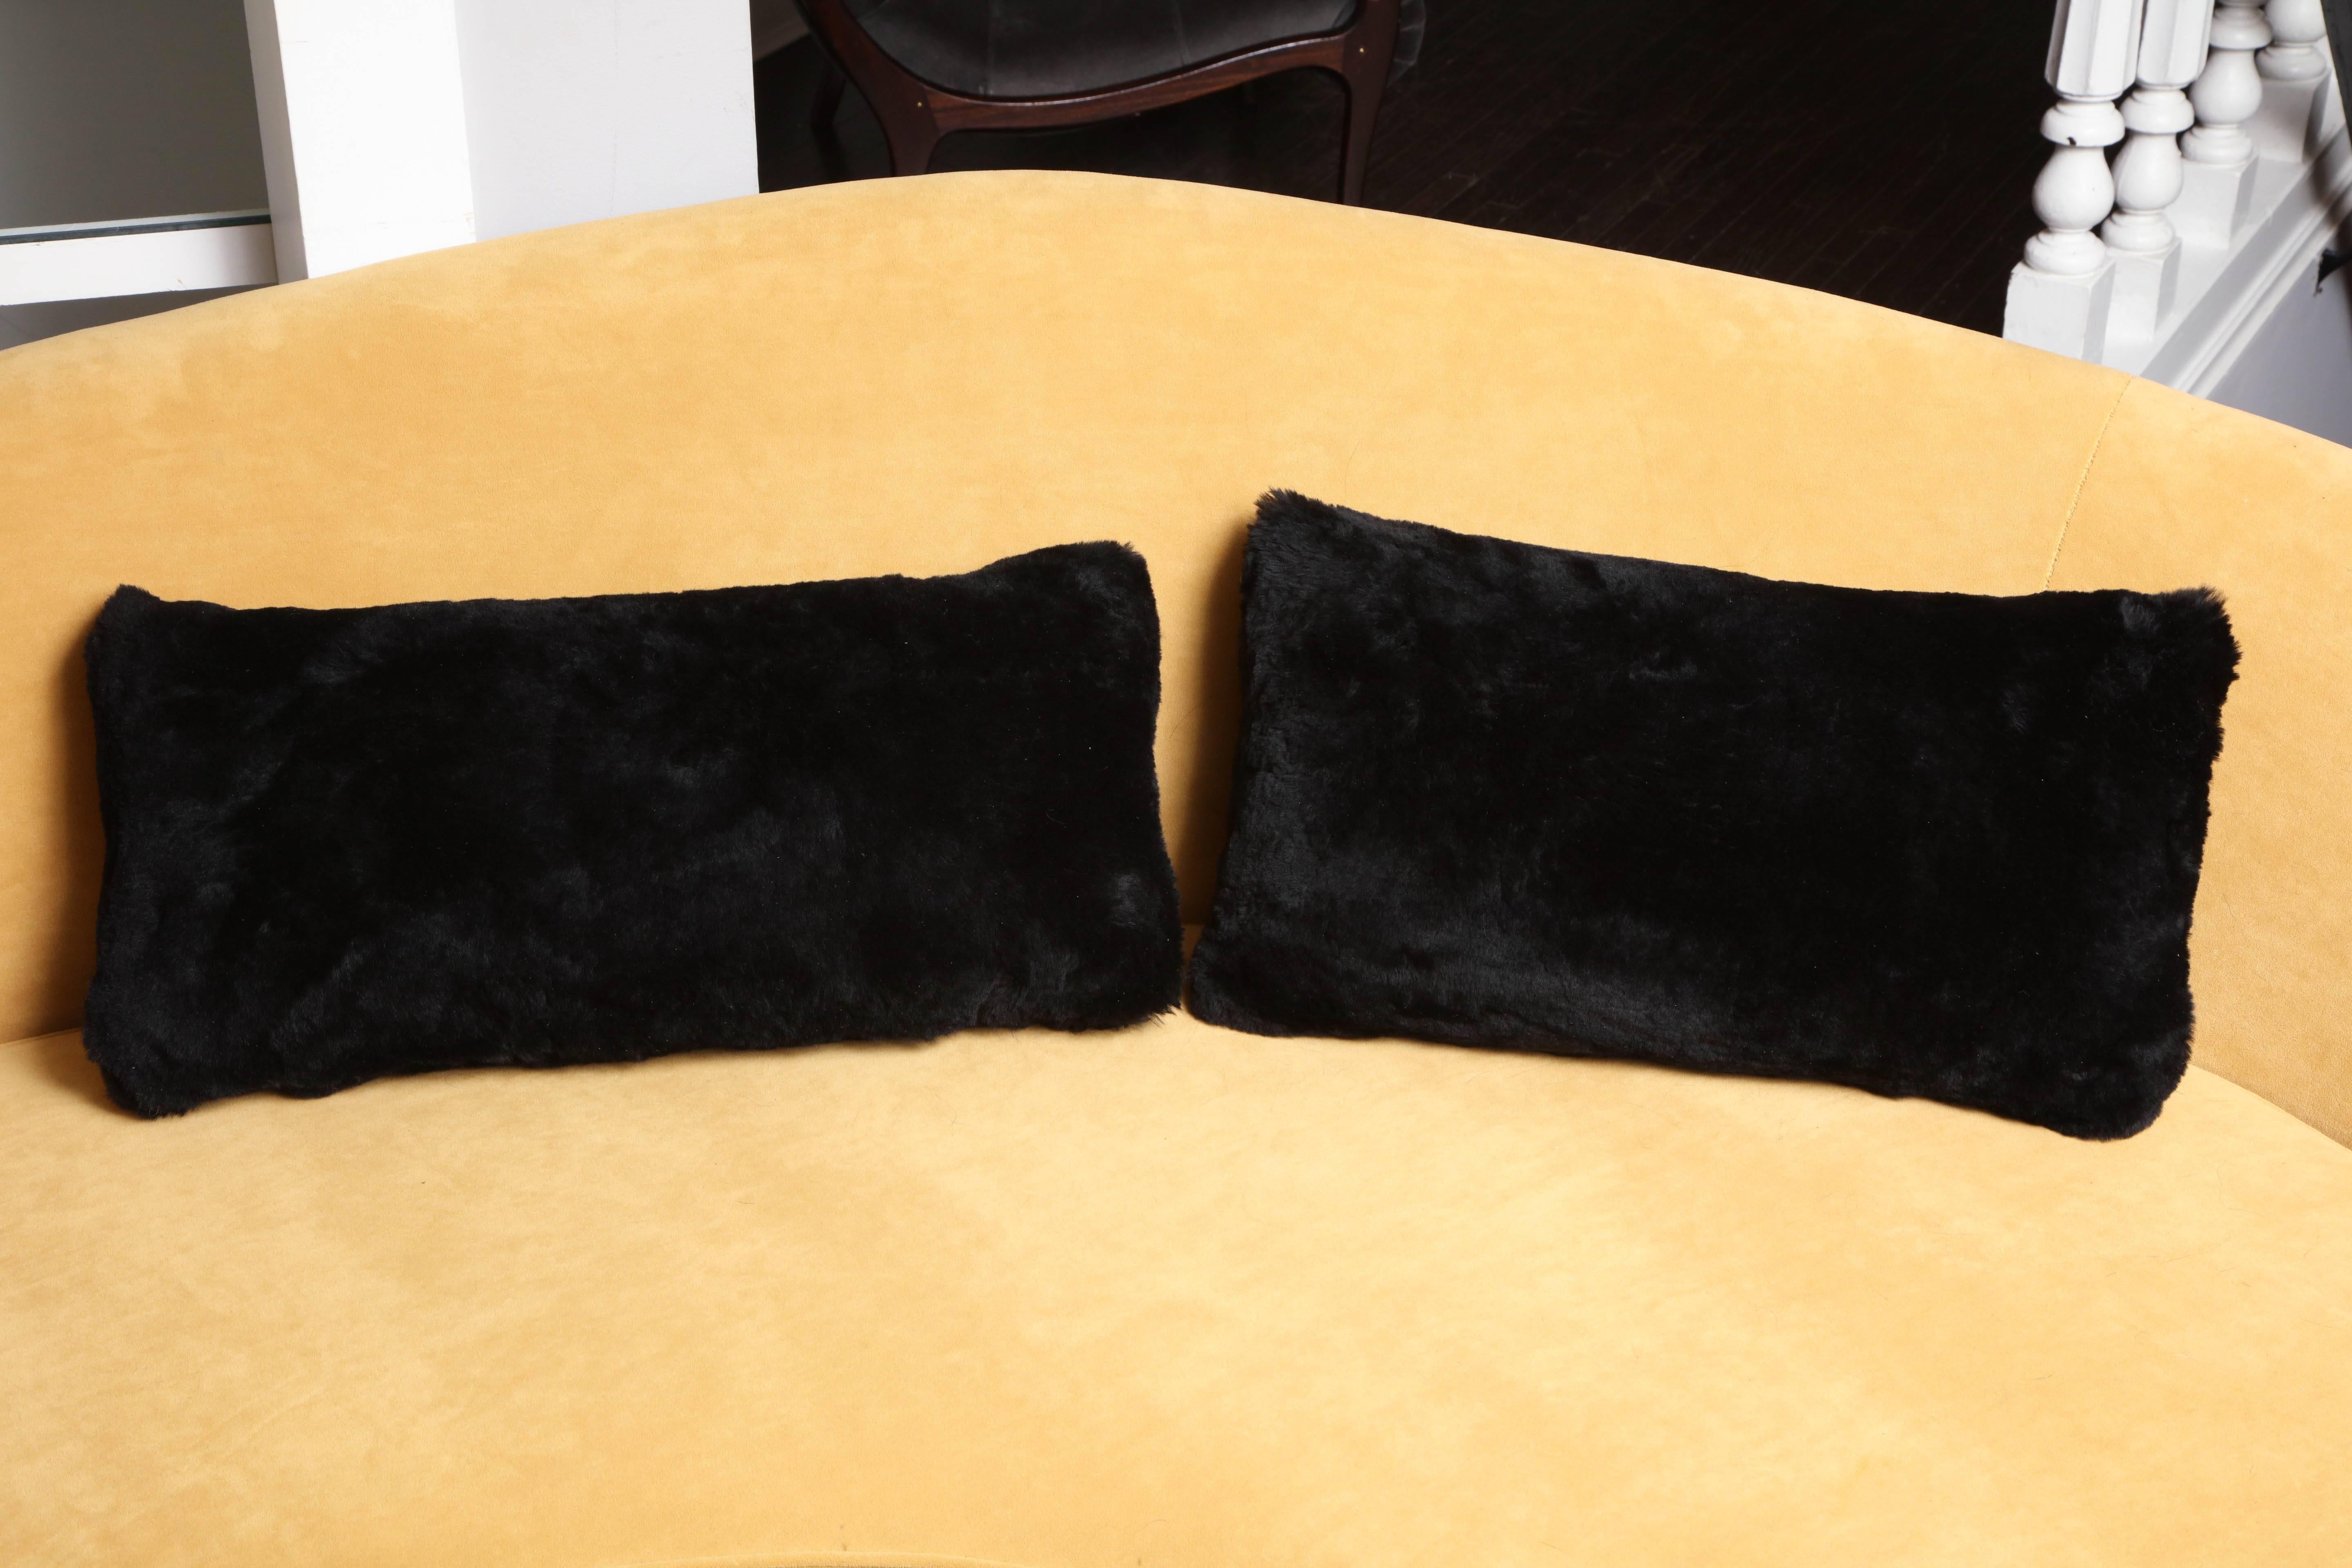 Custom genuine black shearling lumbar pillow. Customization is available for different sizes and colors.

*Price per pillow not a pair.